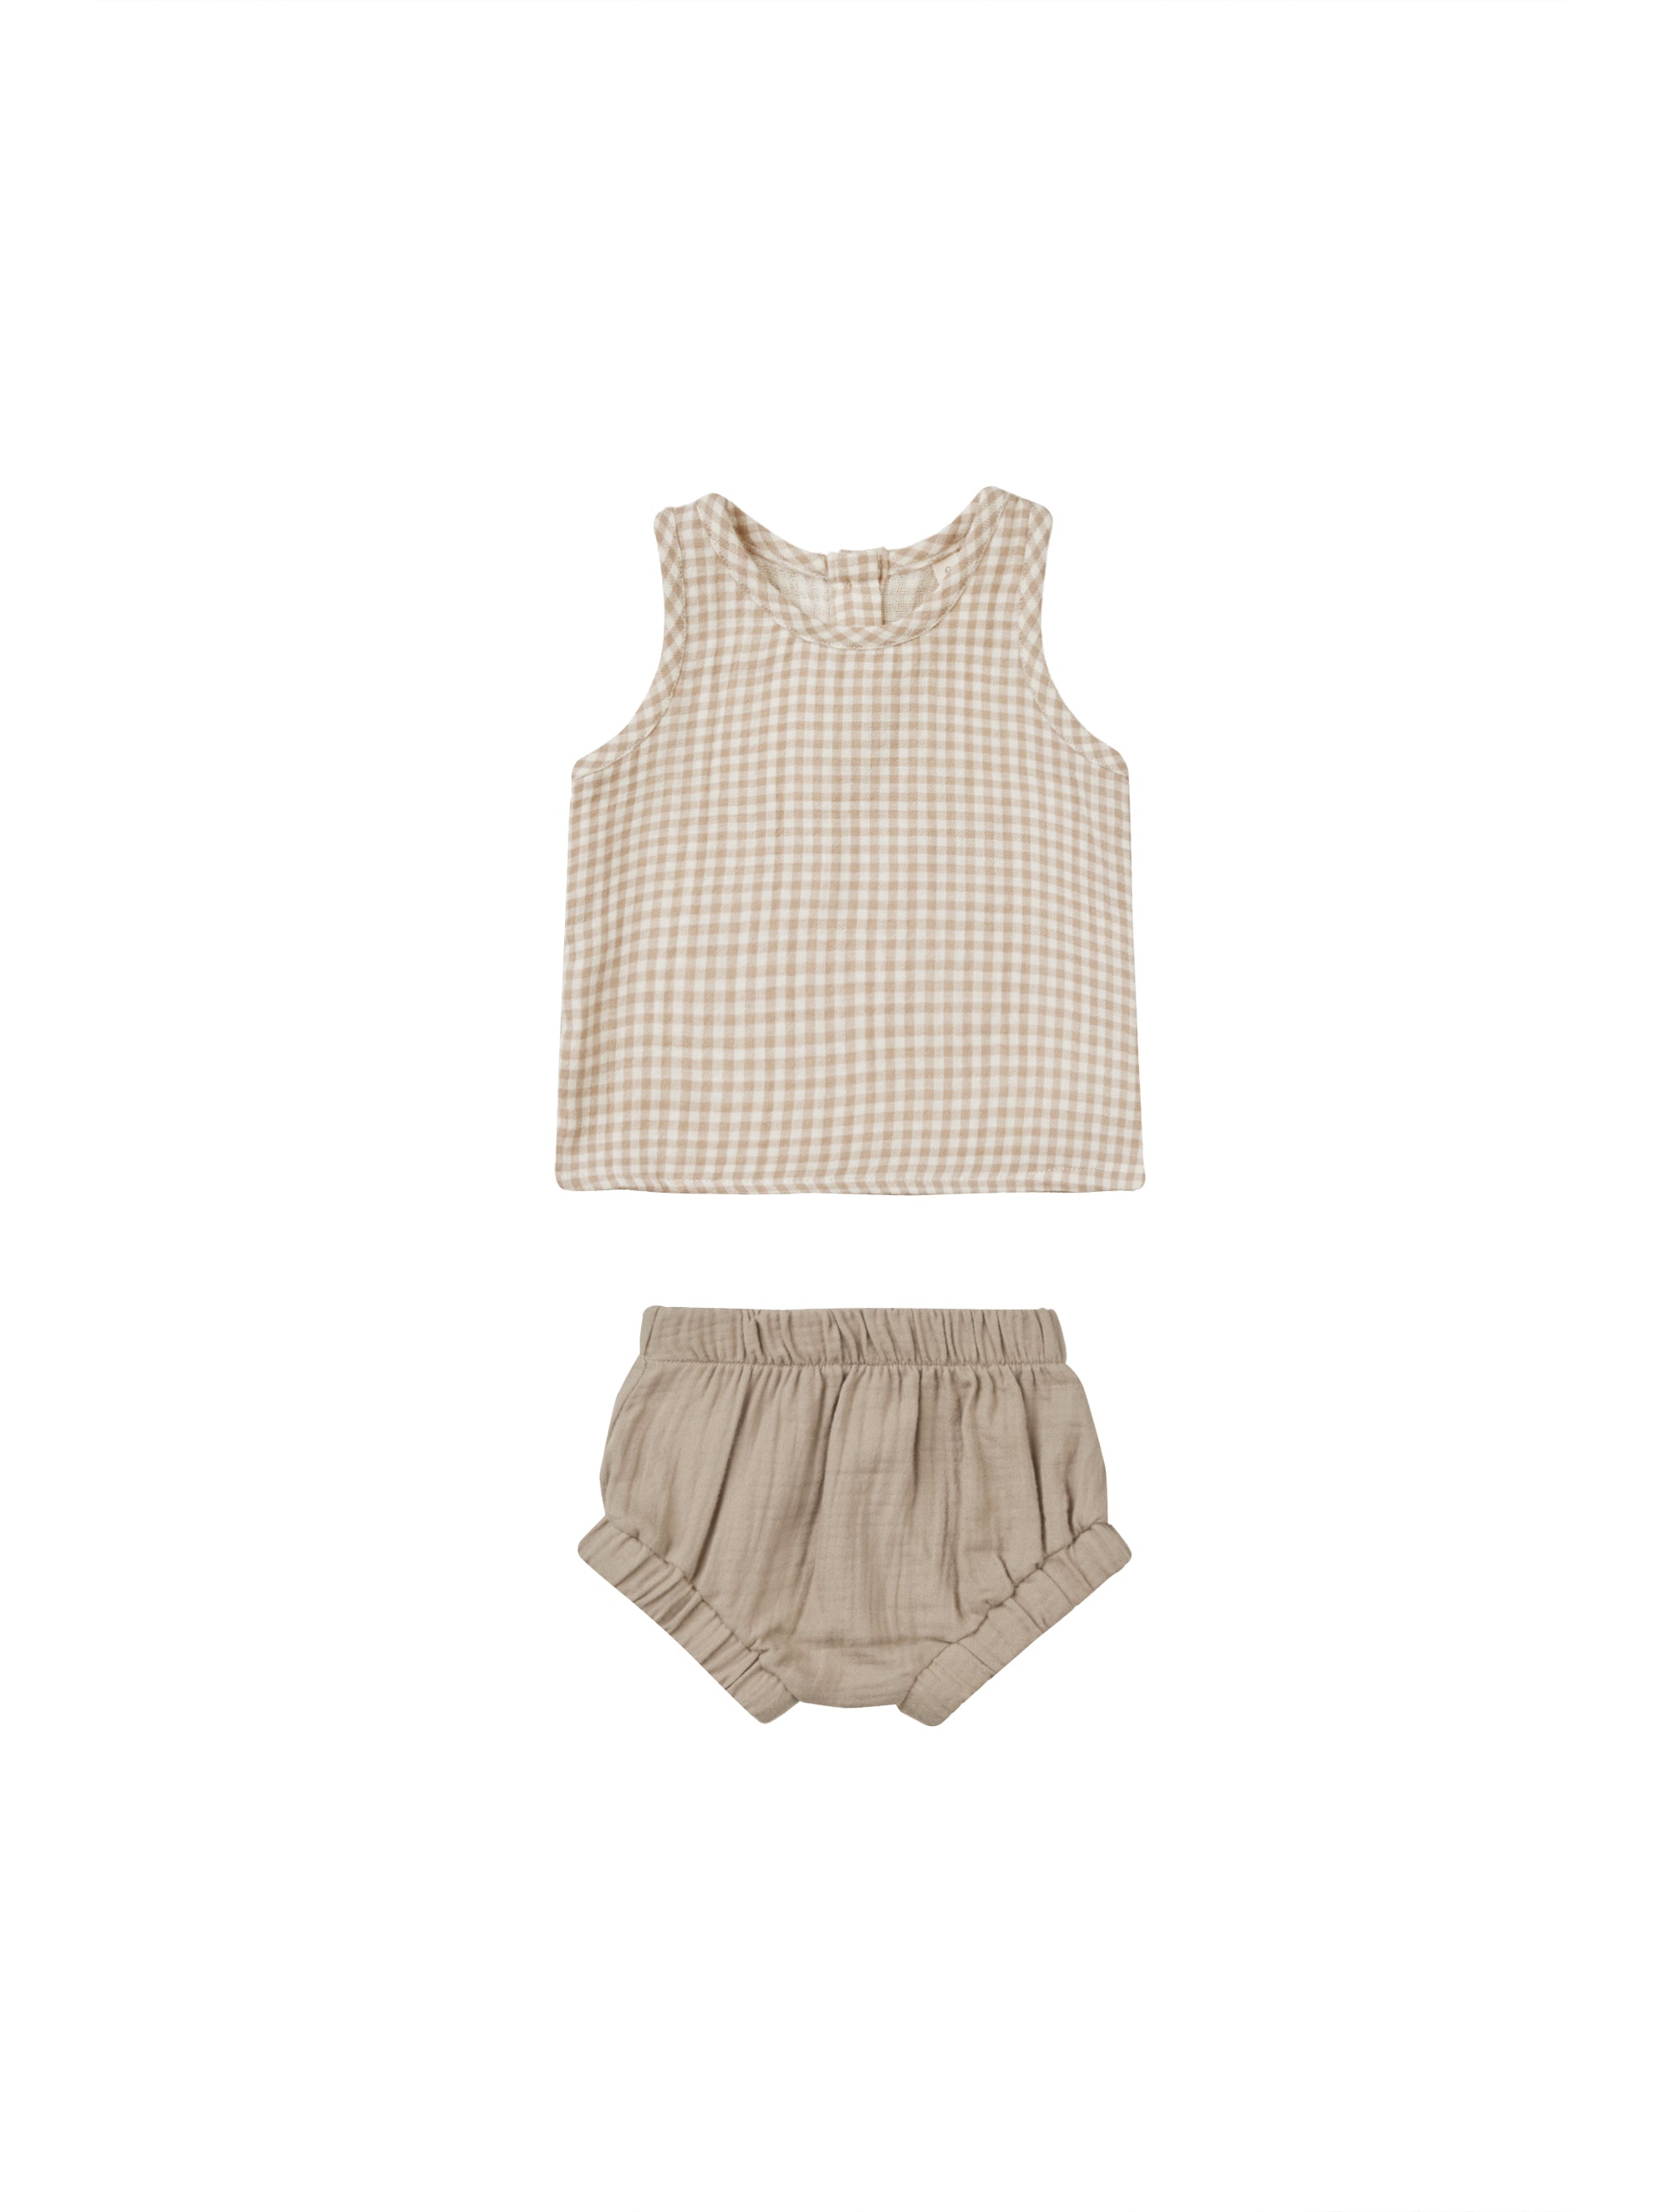 Quincy Mae Woven Tank + Shorts Set - Oat Gingham